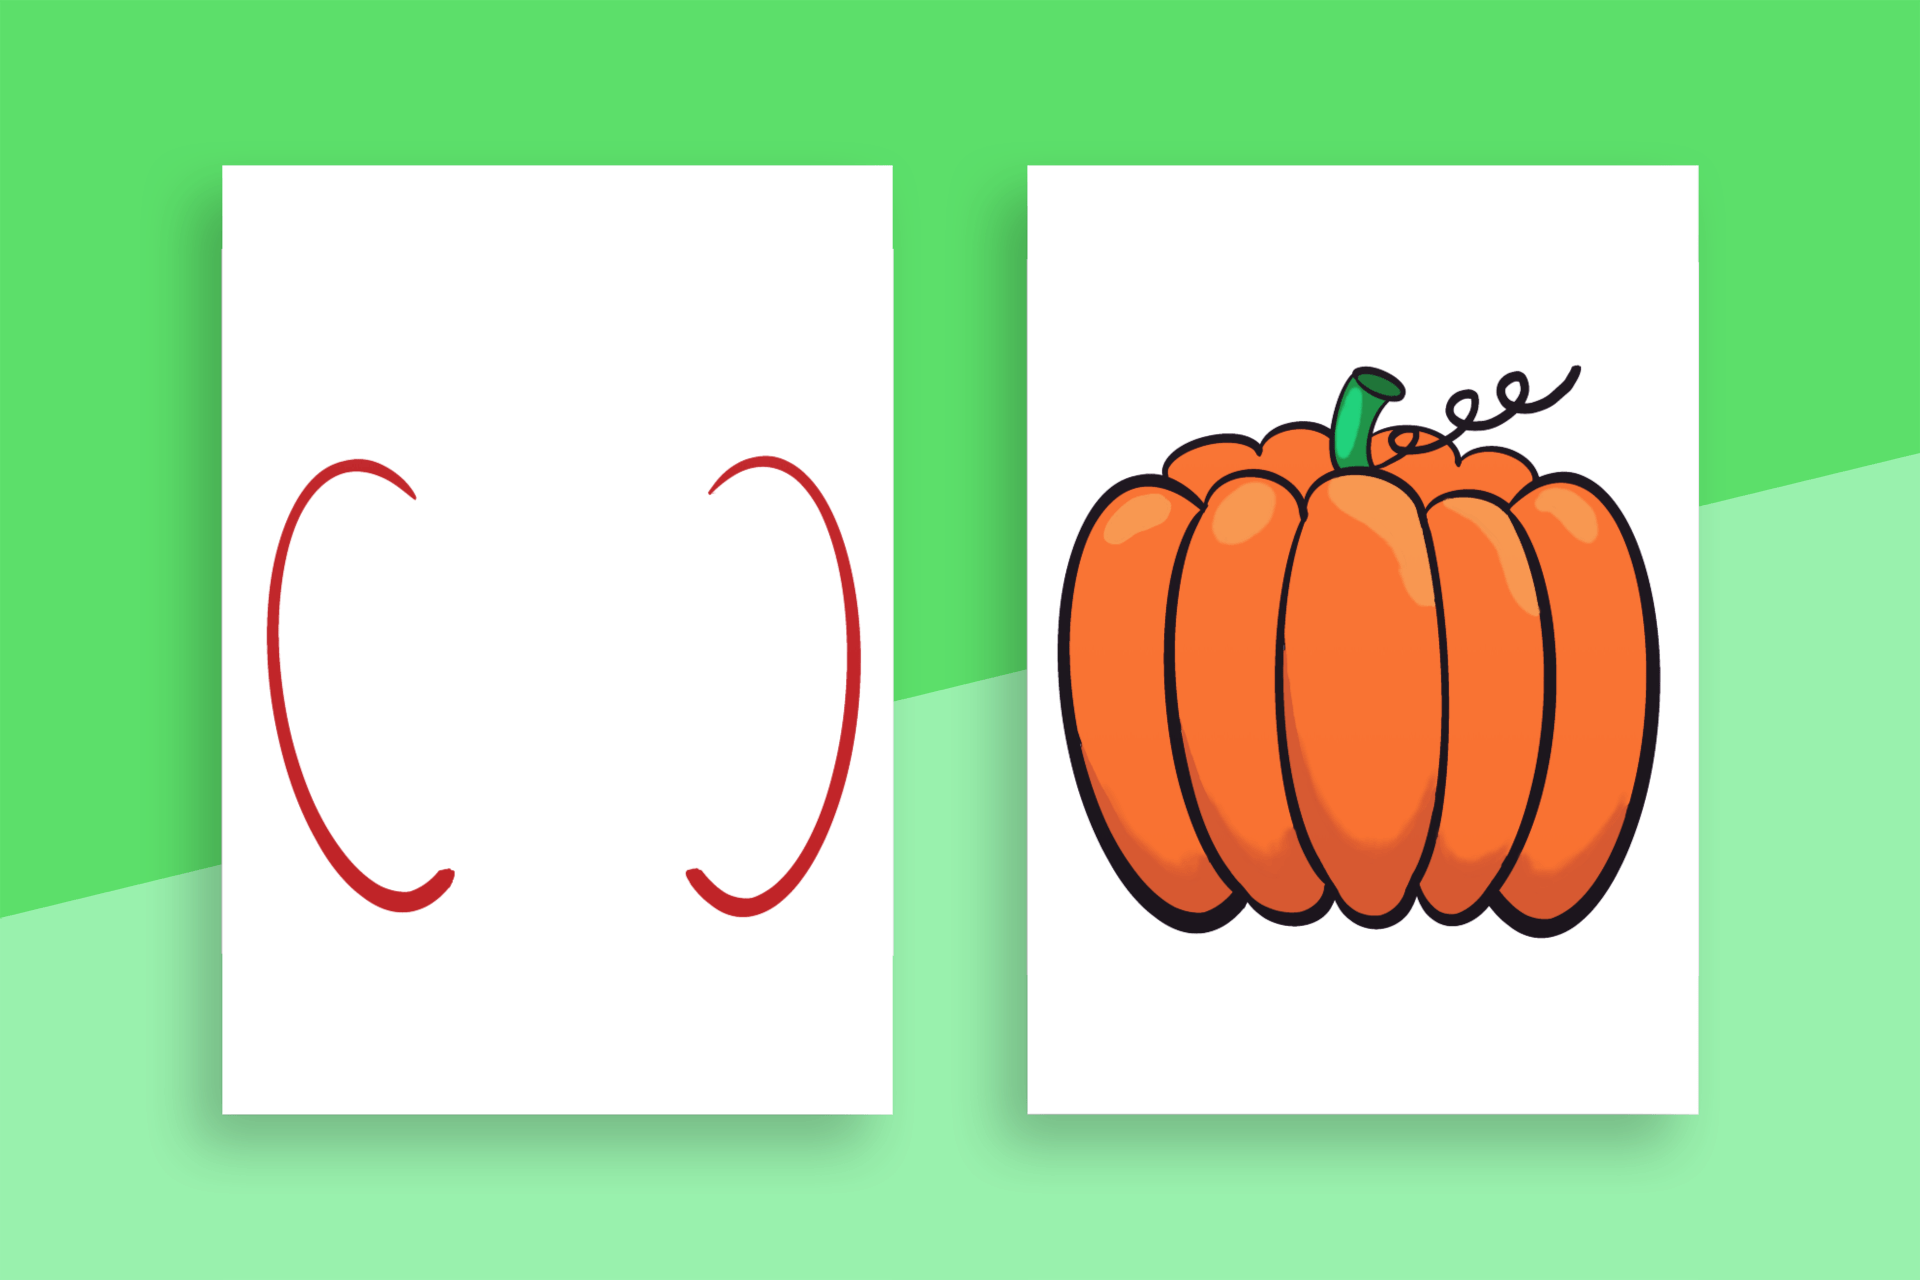 How to draw a pumpkin picture